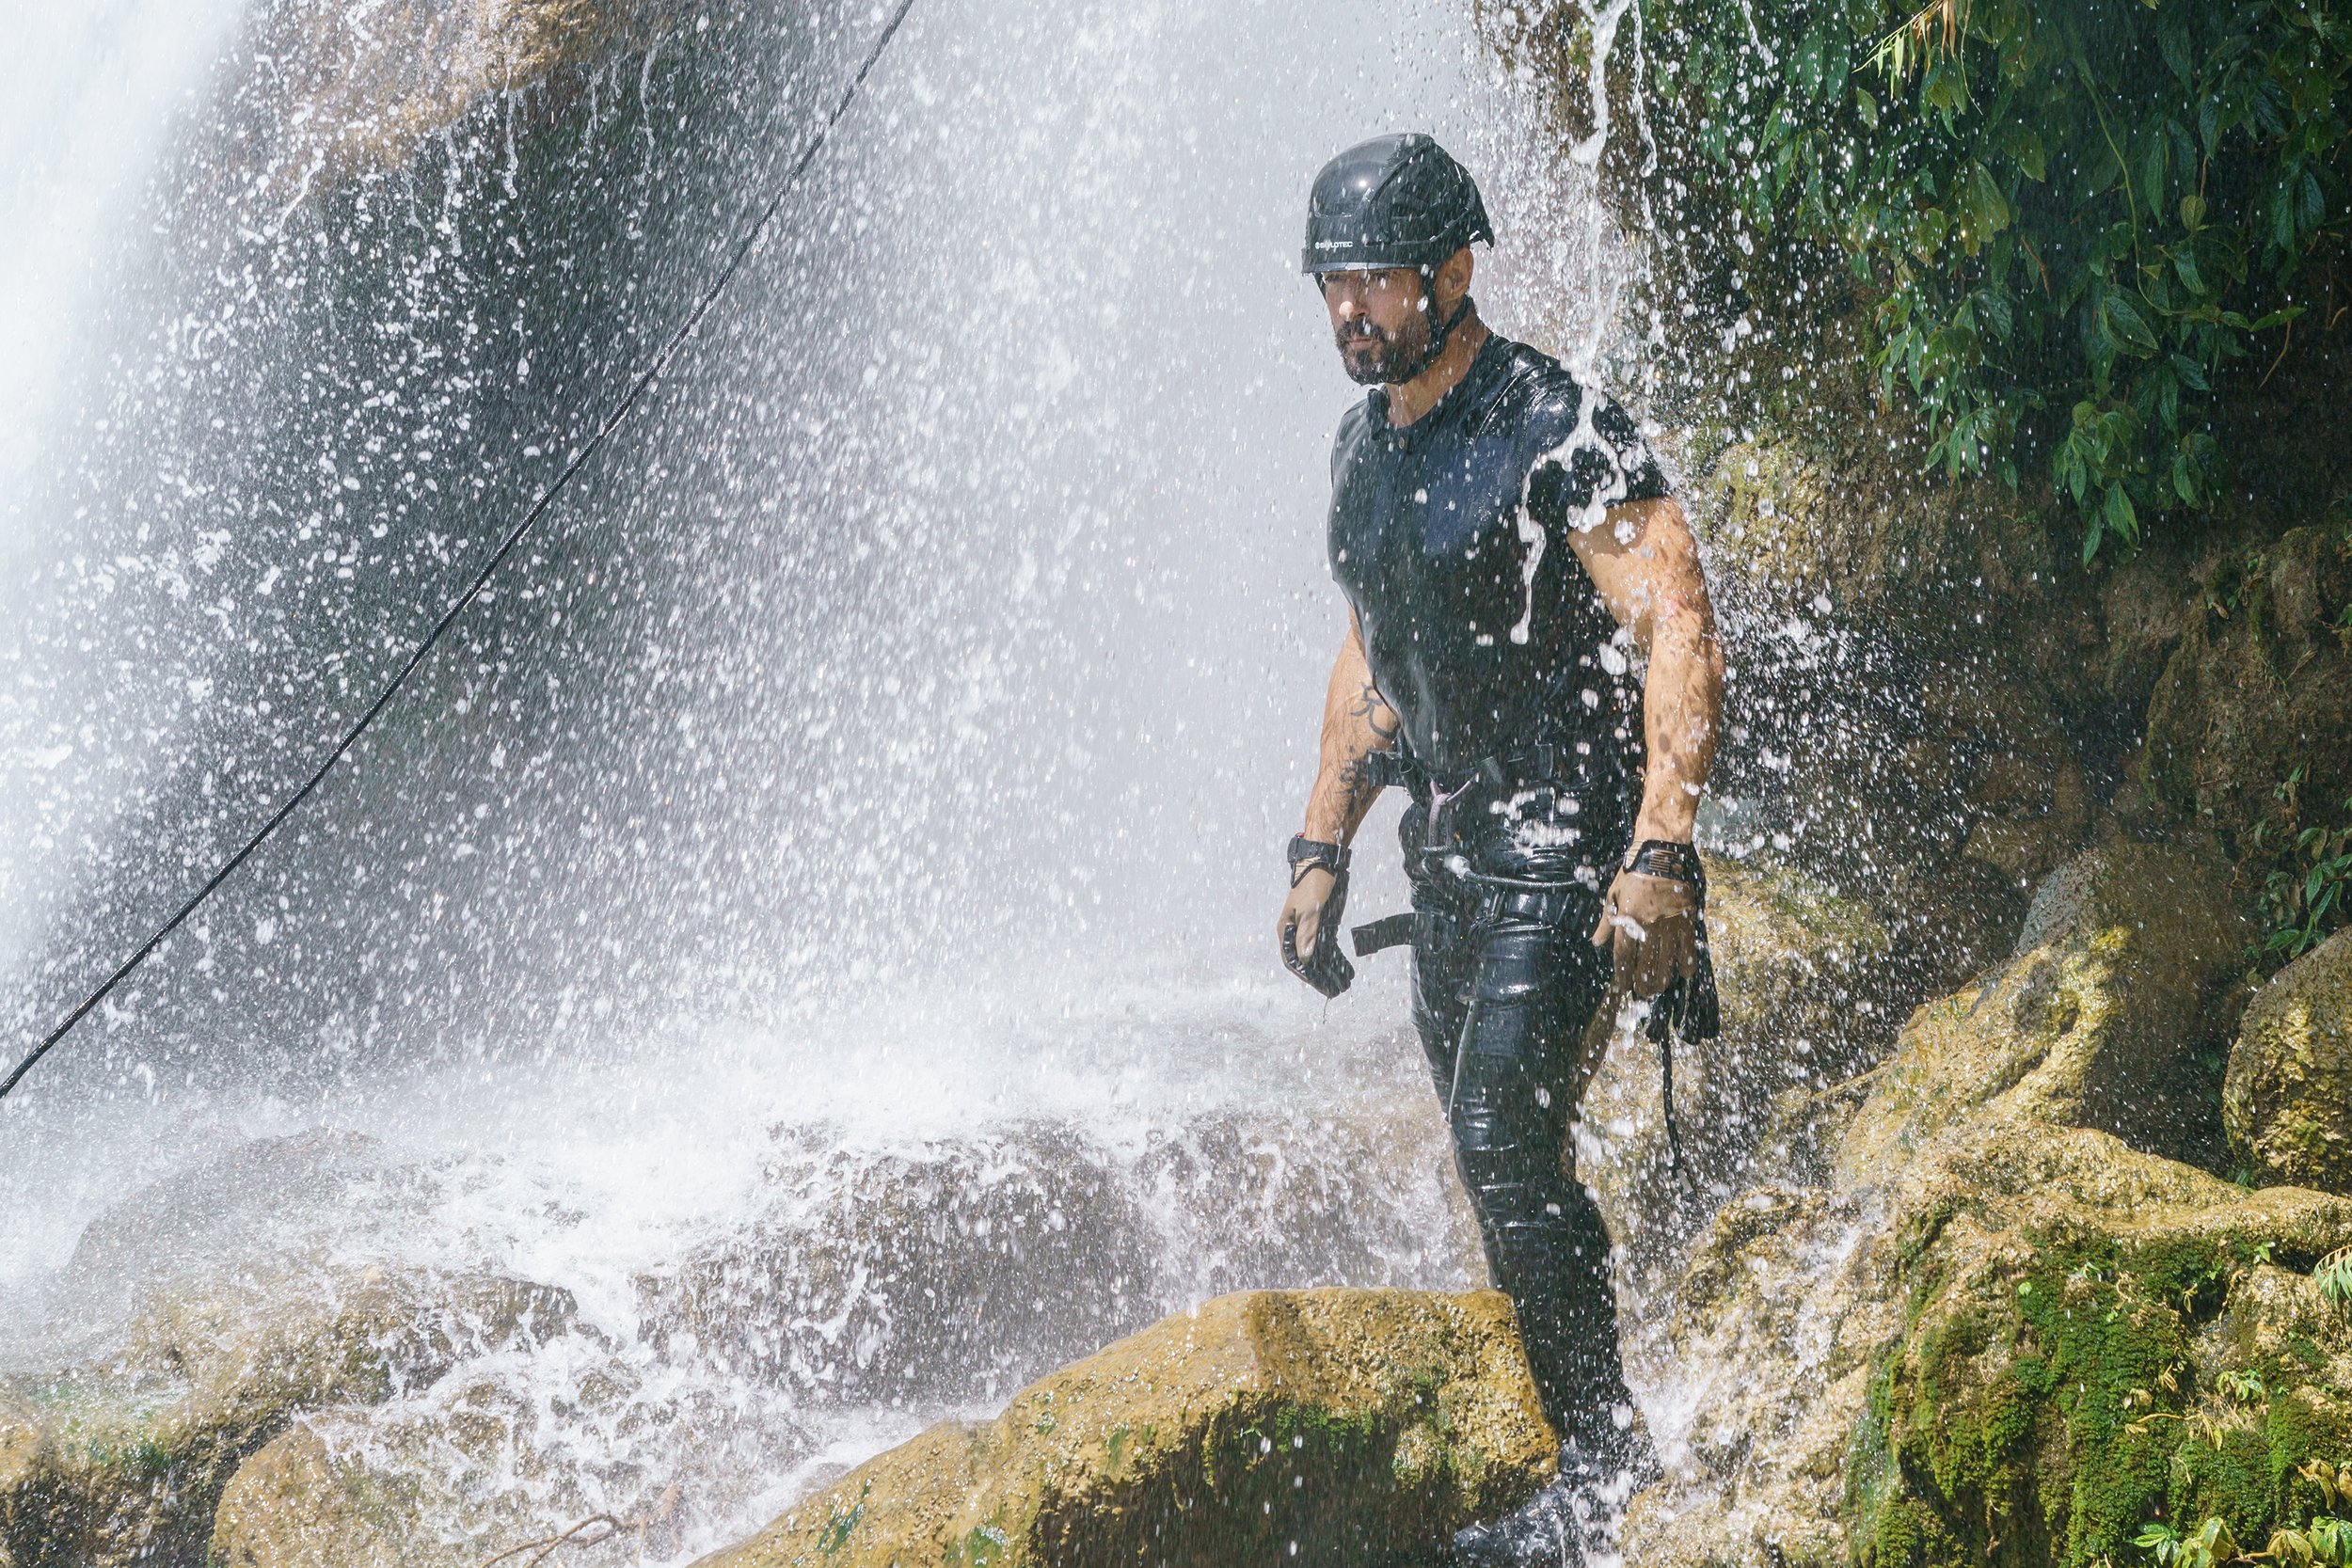  Rudy Reyes - Waterfall Abseil  Episode 2: Mindset  Minnow Films / Channel 4 